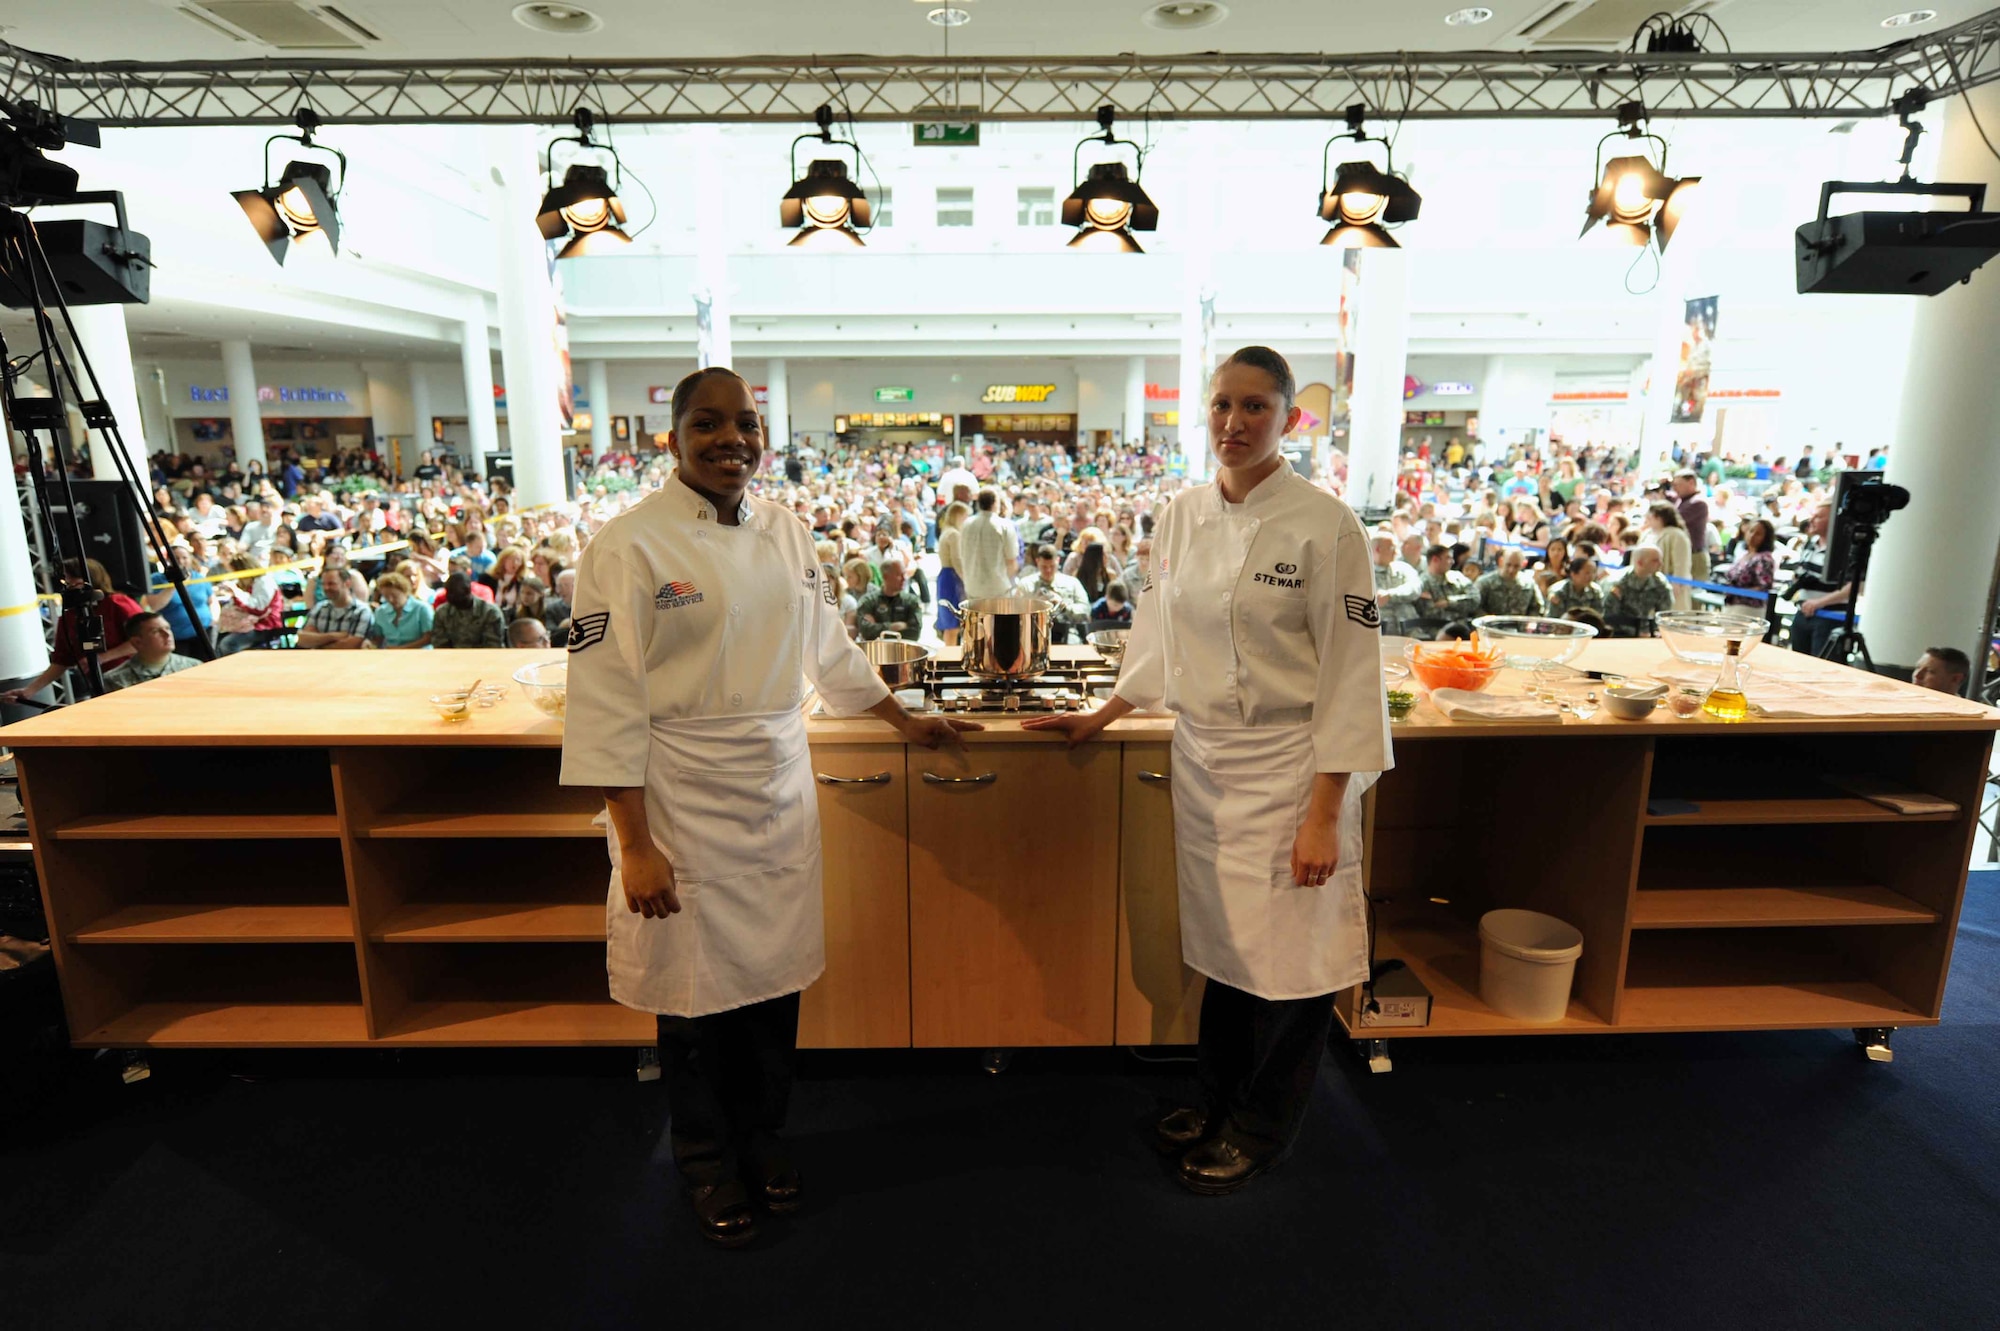 U.S. Air Force Staff Sgt's. Vilynthia Hawkins and Sheryl Stewart, 86th Services Squadron chef services specialists, pose for the camera prior to the Chef Emeril Lagasse cooking demonstration at the Kaiserslautern Military Community Center, Ramstein Air Base, Germany, May 29, 2010. The Sergeants were selected to accompany Celebrity Chef Emeril Lagasse during an hour long cooking demonstration at the KMCC. Chef Emeril was also on hand signing copies of his new book for over a thousand visitors. (U.S. Air Force photo by Staff Sgt. Stephen J. Otero)